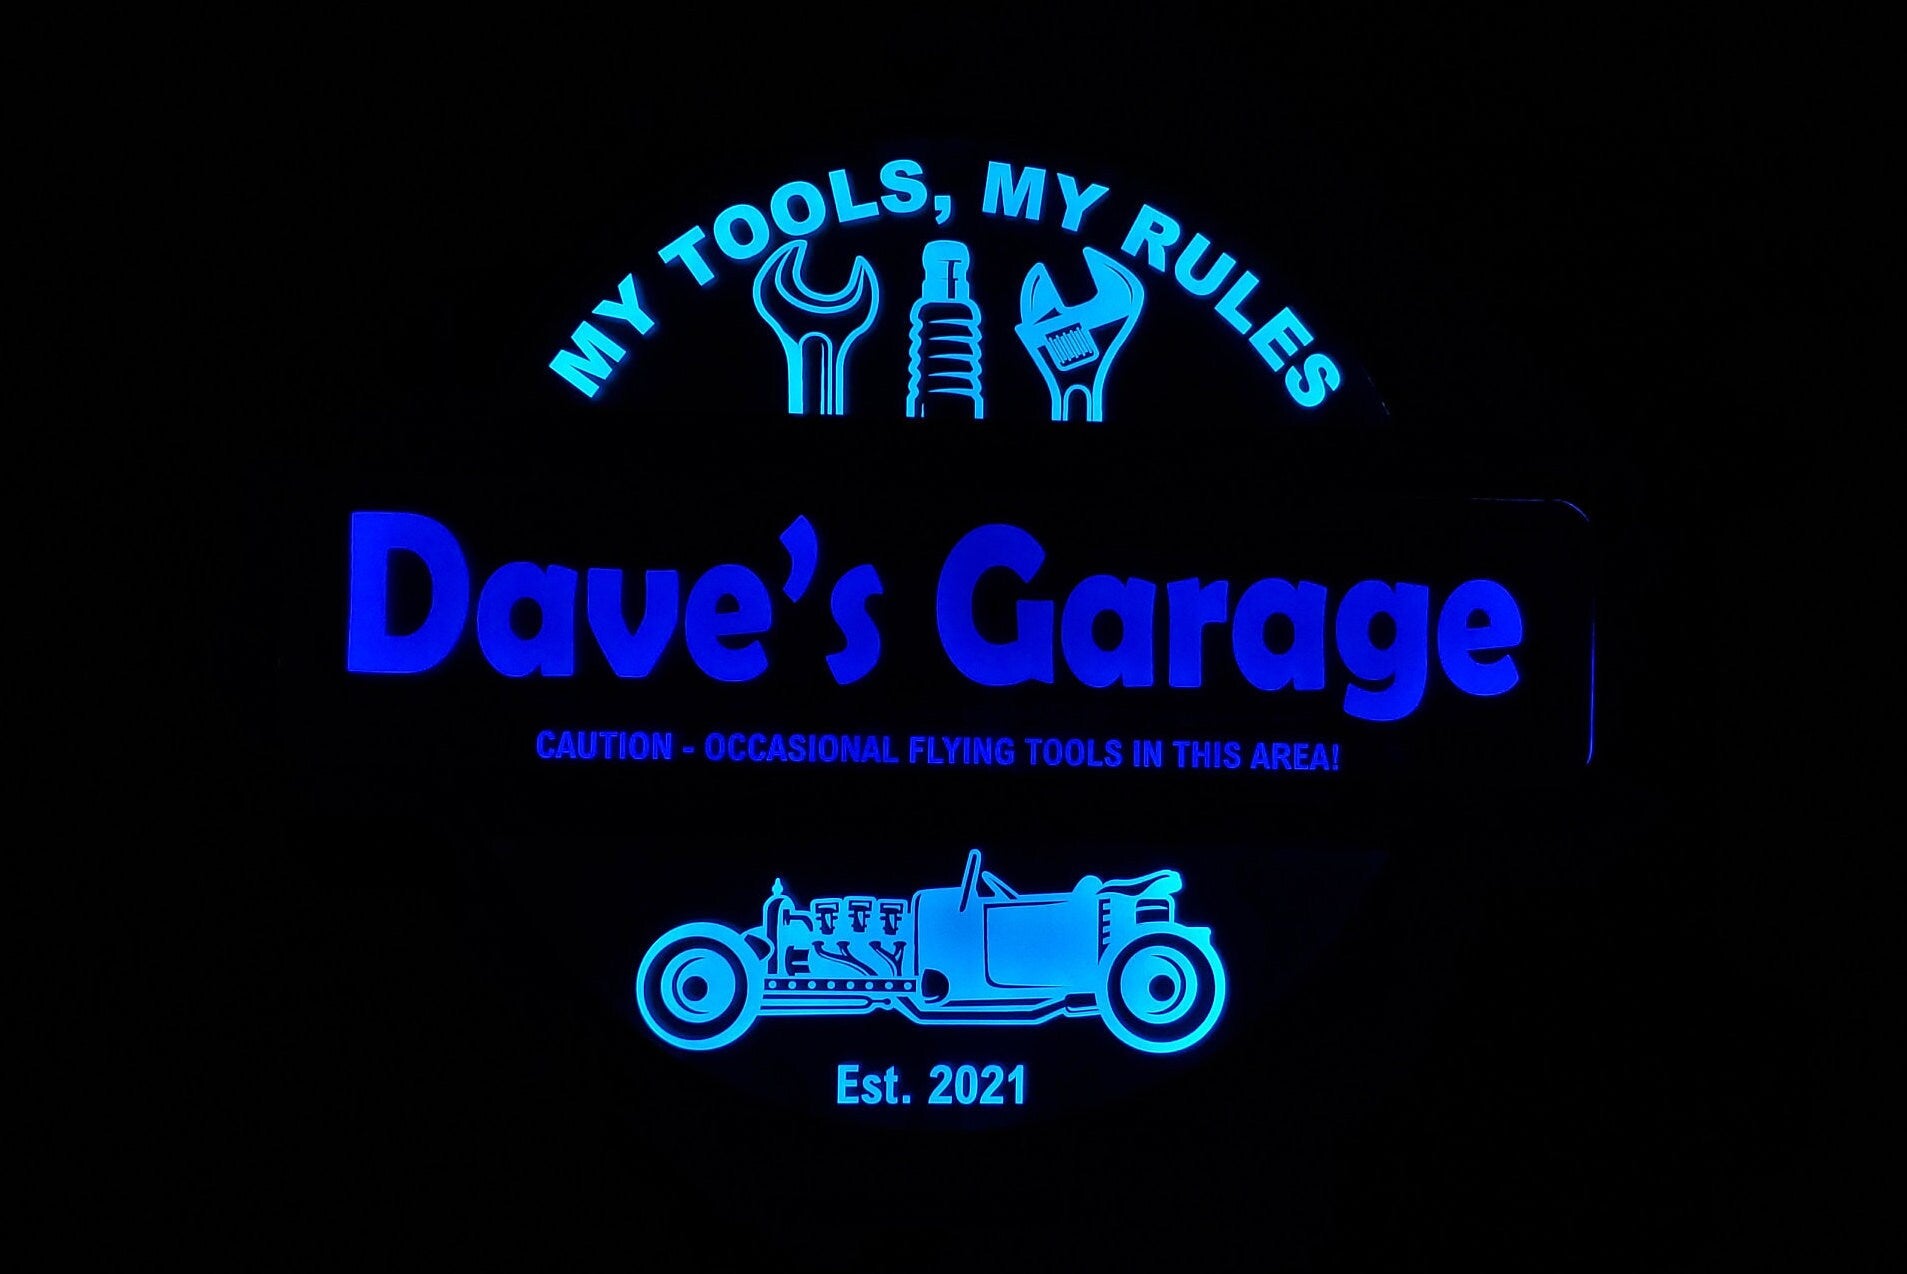 Unique Custom 3 Color Garage Workshop Led Wall Sign Neon Like You Can Change the Colors via Remote - 3 Sizes - Free Shipping - Made in USA